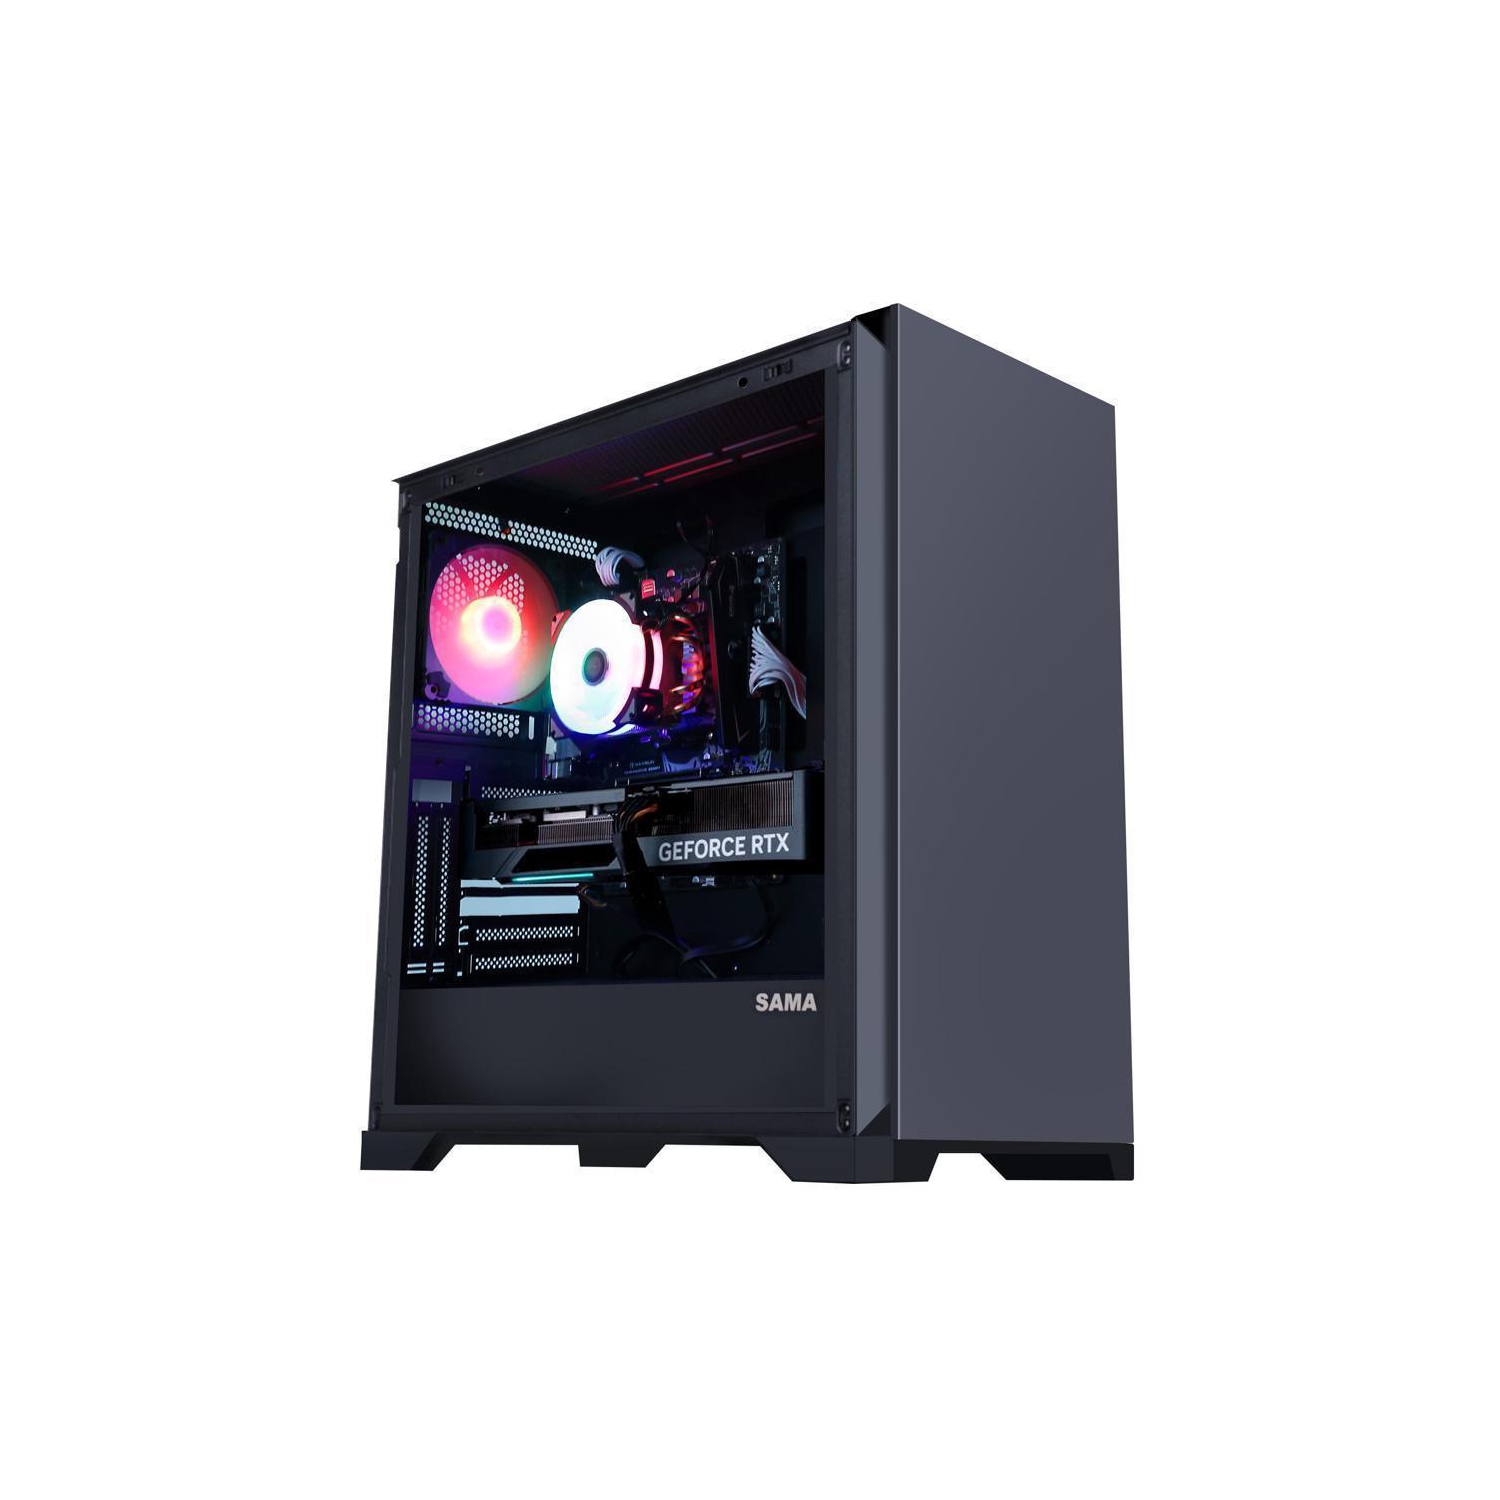 Hoengager Ares Gaming - Intel Core i5-12600K 10-Core 3.7GHz- GeForce GTX 1650- 32GB DDR4 3200MHz - 500GB M.2 + 1TB 2.5'' SATA SSD- WIFI -RGB Fans - Windows 11 Pro Computer